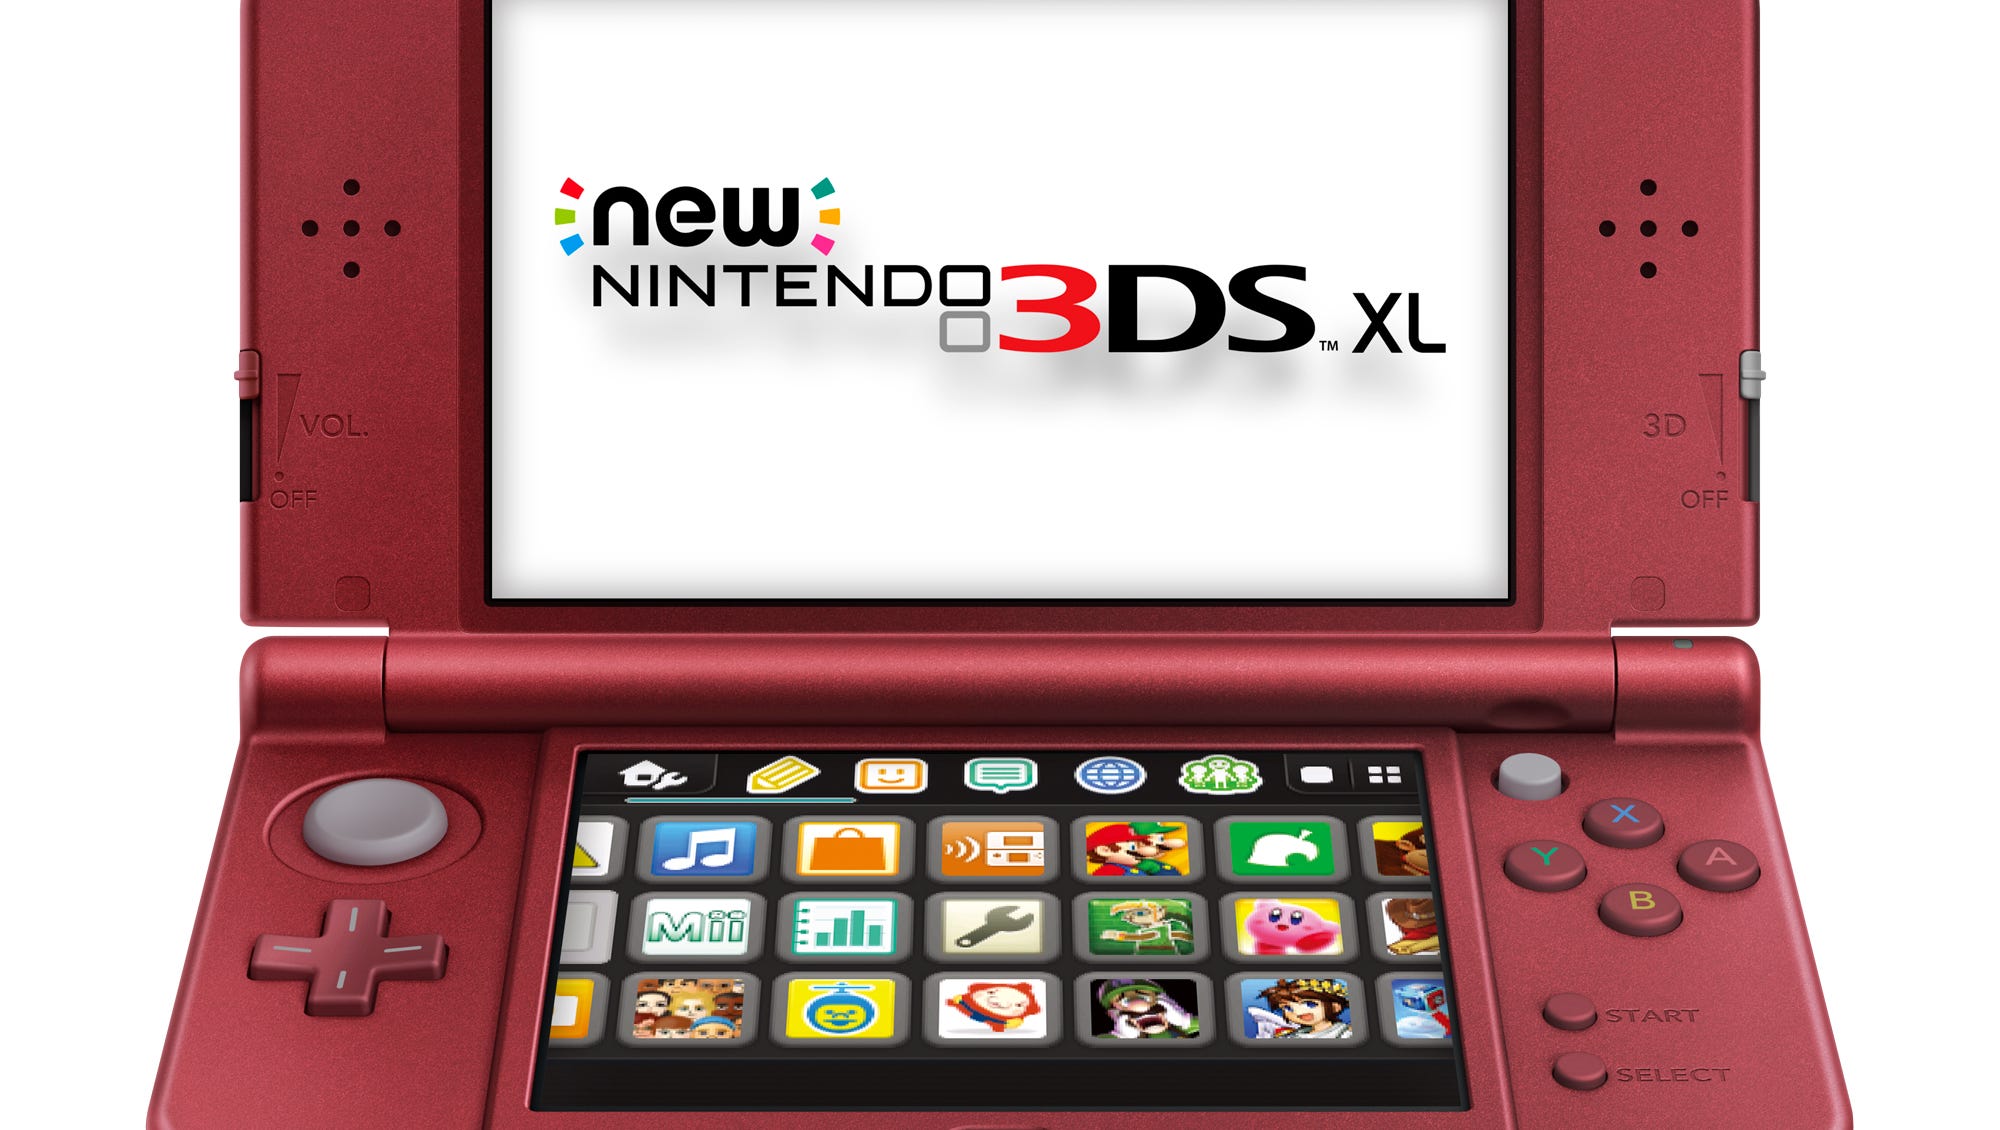 Nintendo Dates New 3ds Xl System For February